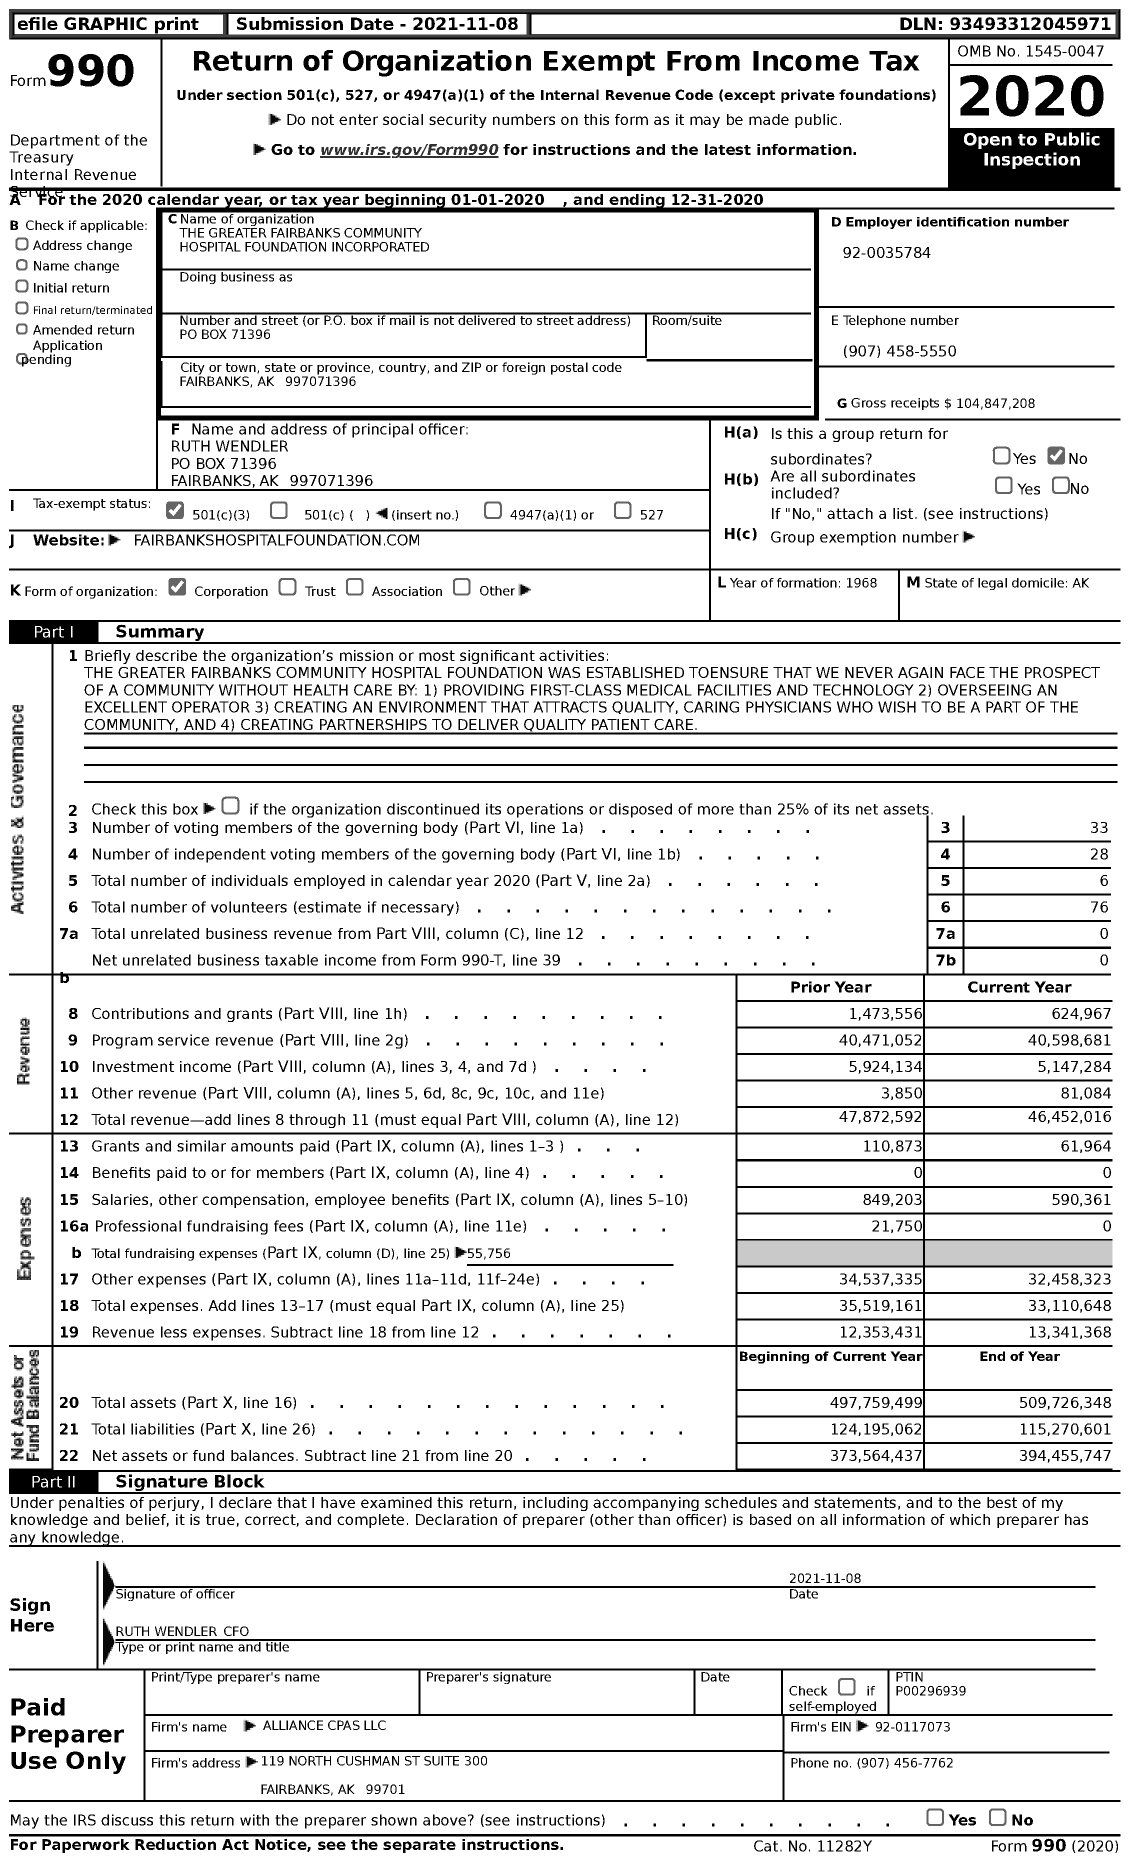 Image of first page of 2020 Form 990 for The Greater Fairbanks Community Hospital Foundation Incorporated